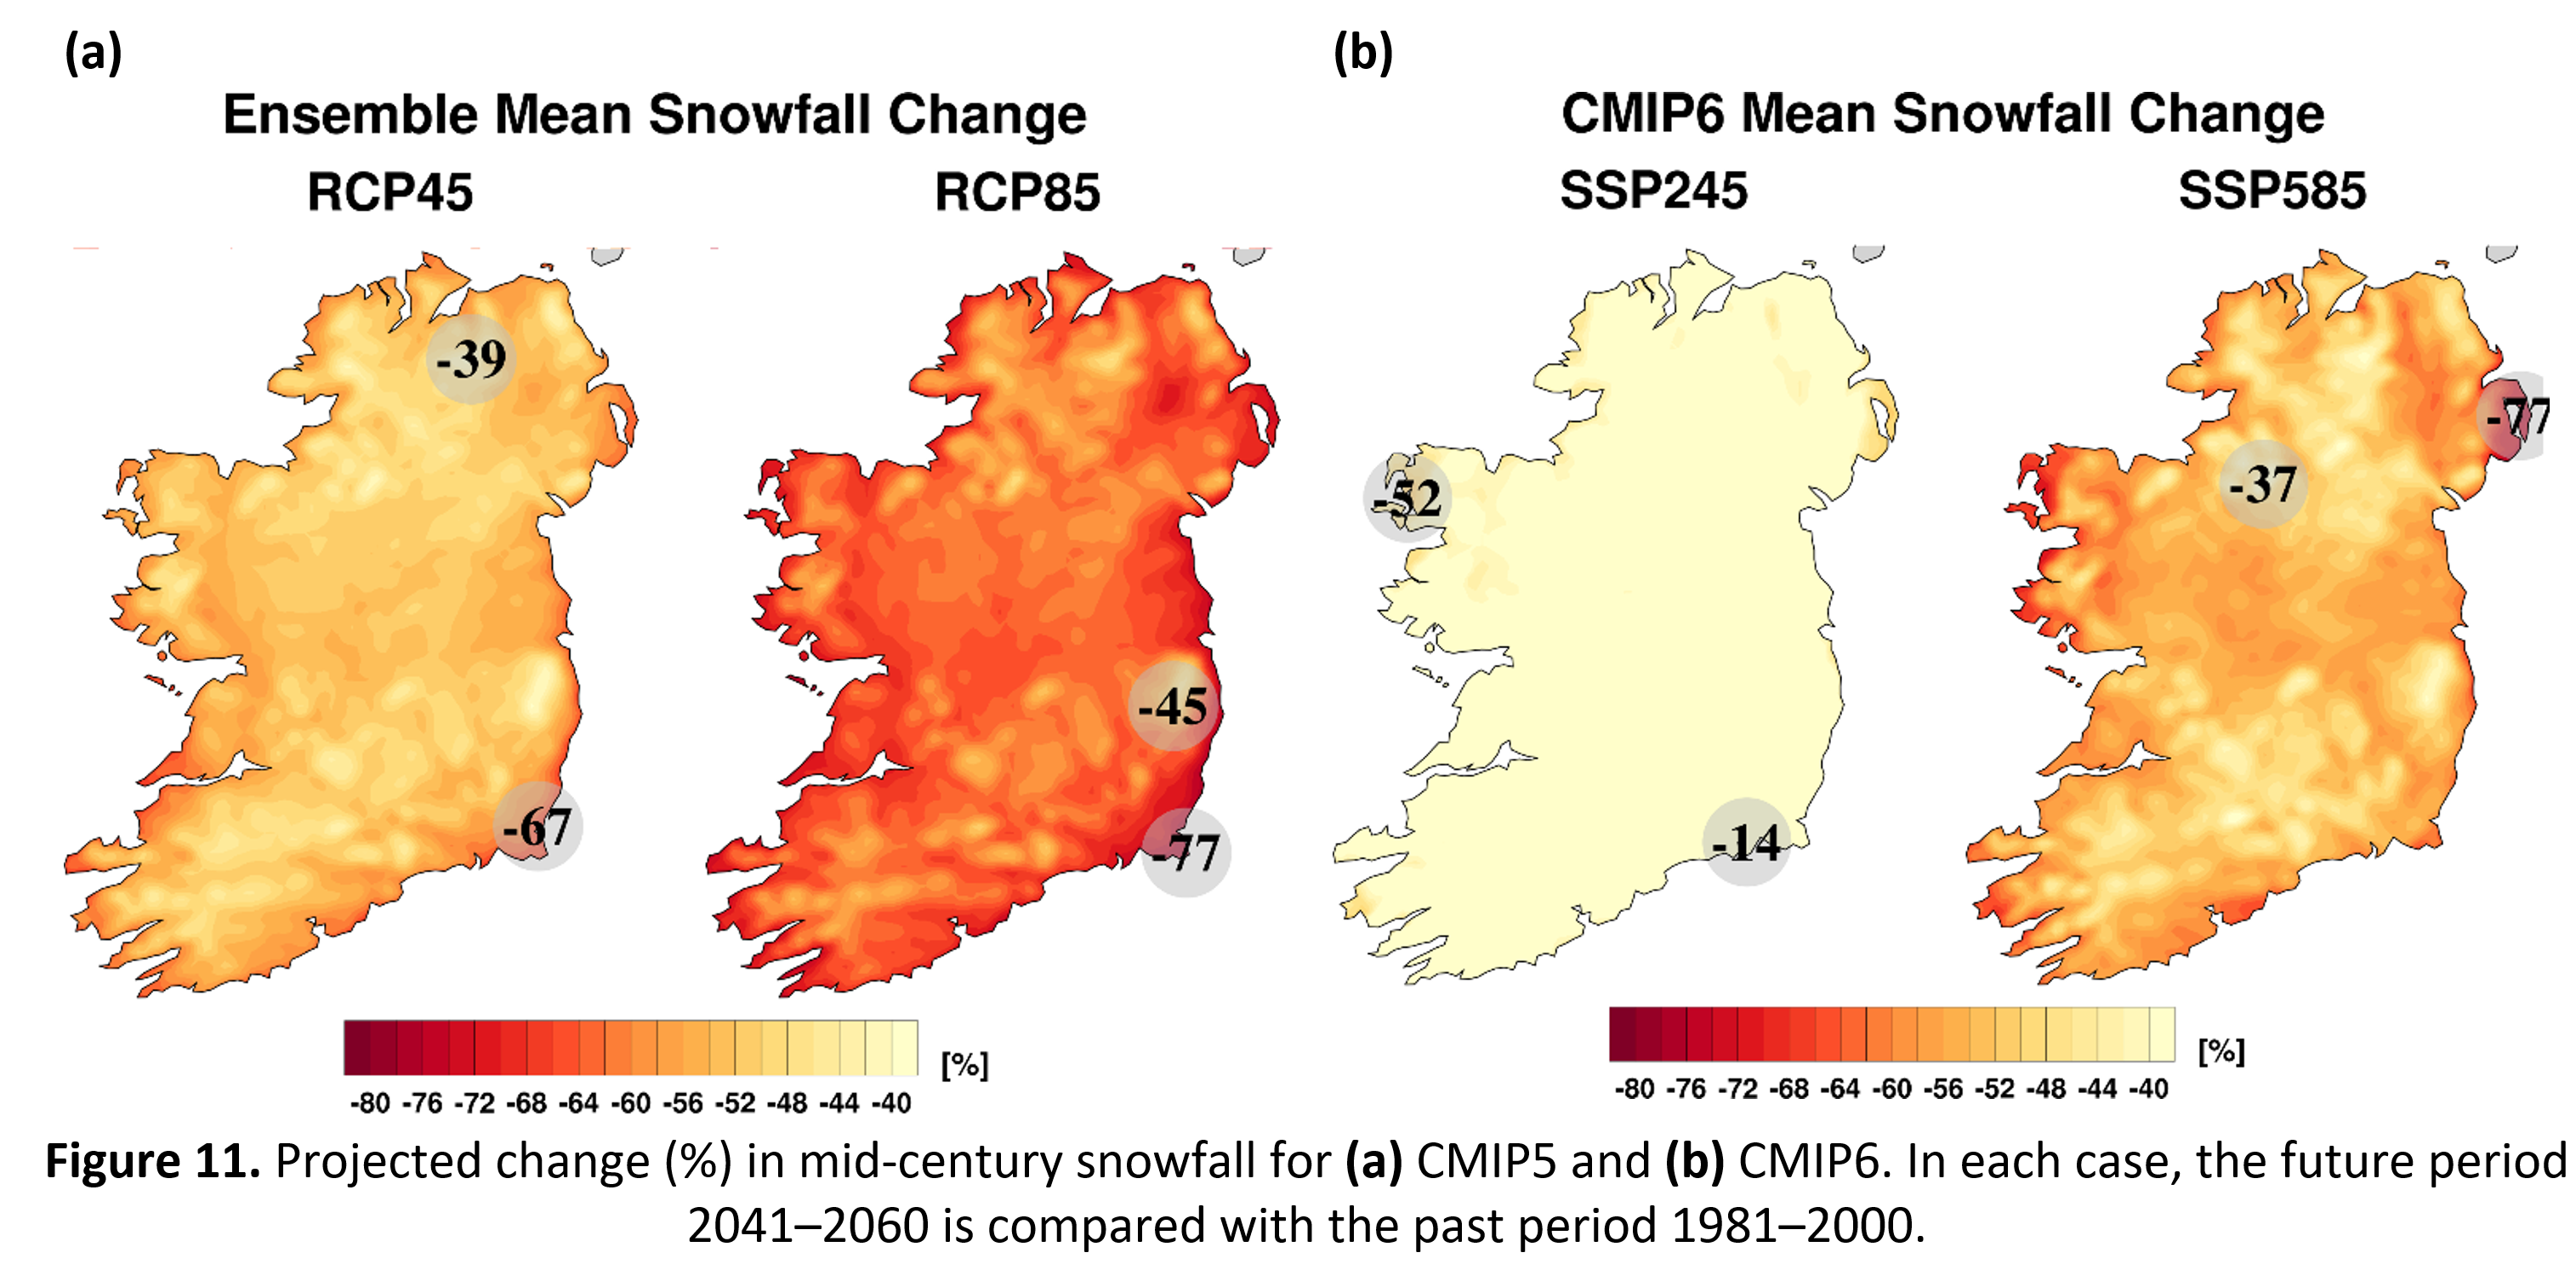 Figure 11. Projected change (%) in mid-century snowfall for (a) CMIP5 and (b) CMIP6. In each case, the future period 2041–2060 is compared with the past period 1981–2000.